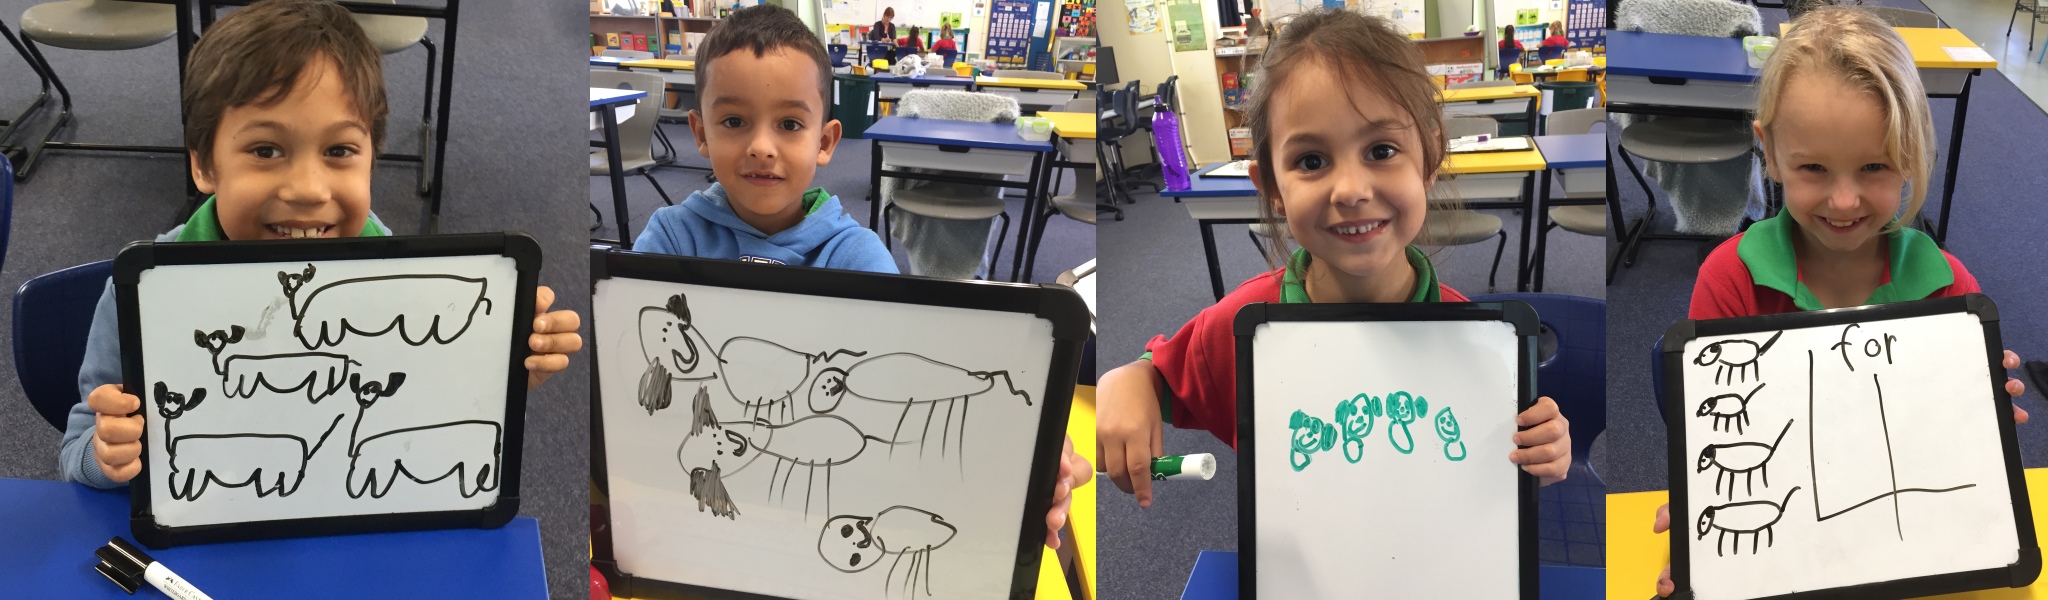 students showing off their drawings on mini whiteboard